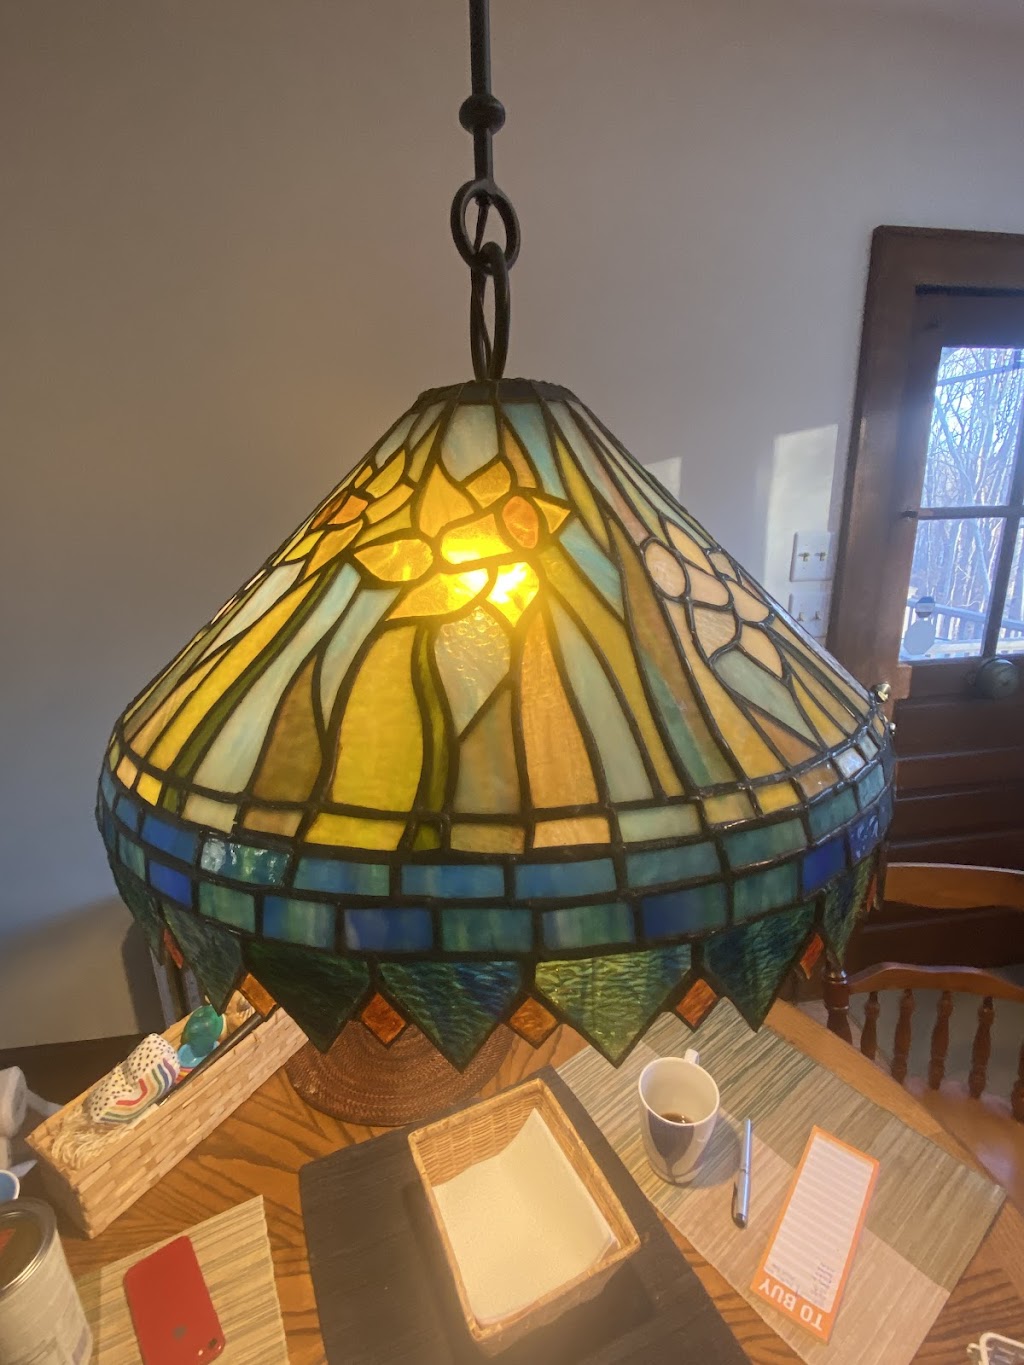 Stained Glass Gallery | 26 E Lake Blvd, Morristown, NJ 07960 | Phone: (973) 998-1970